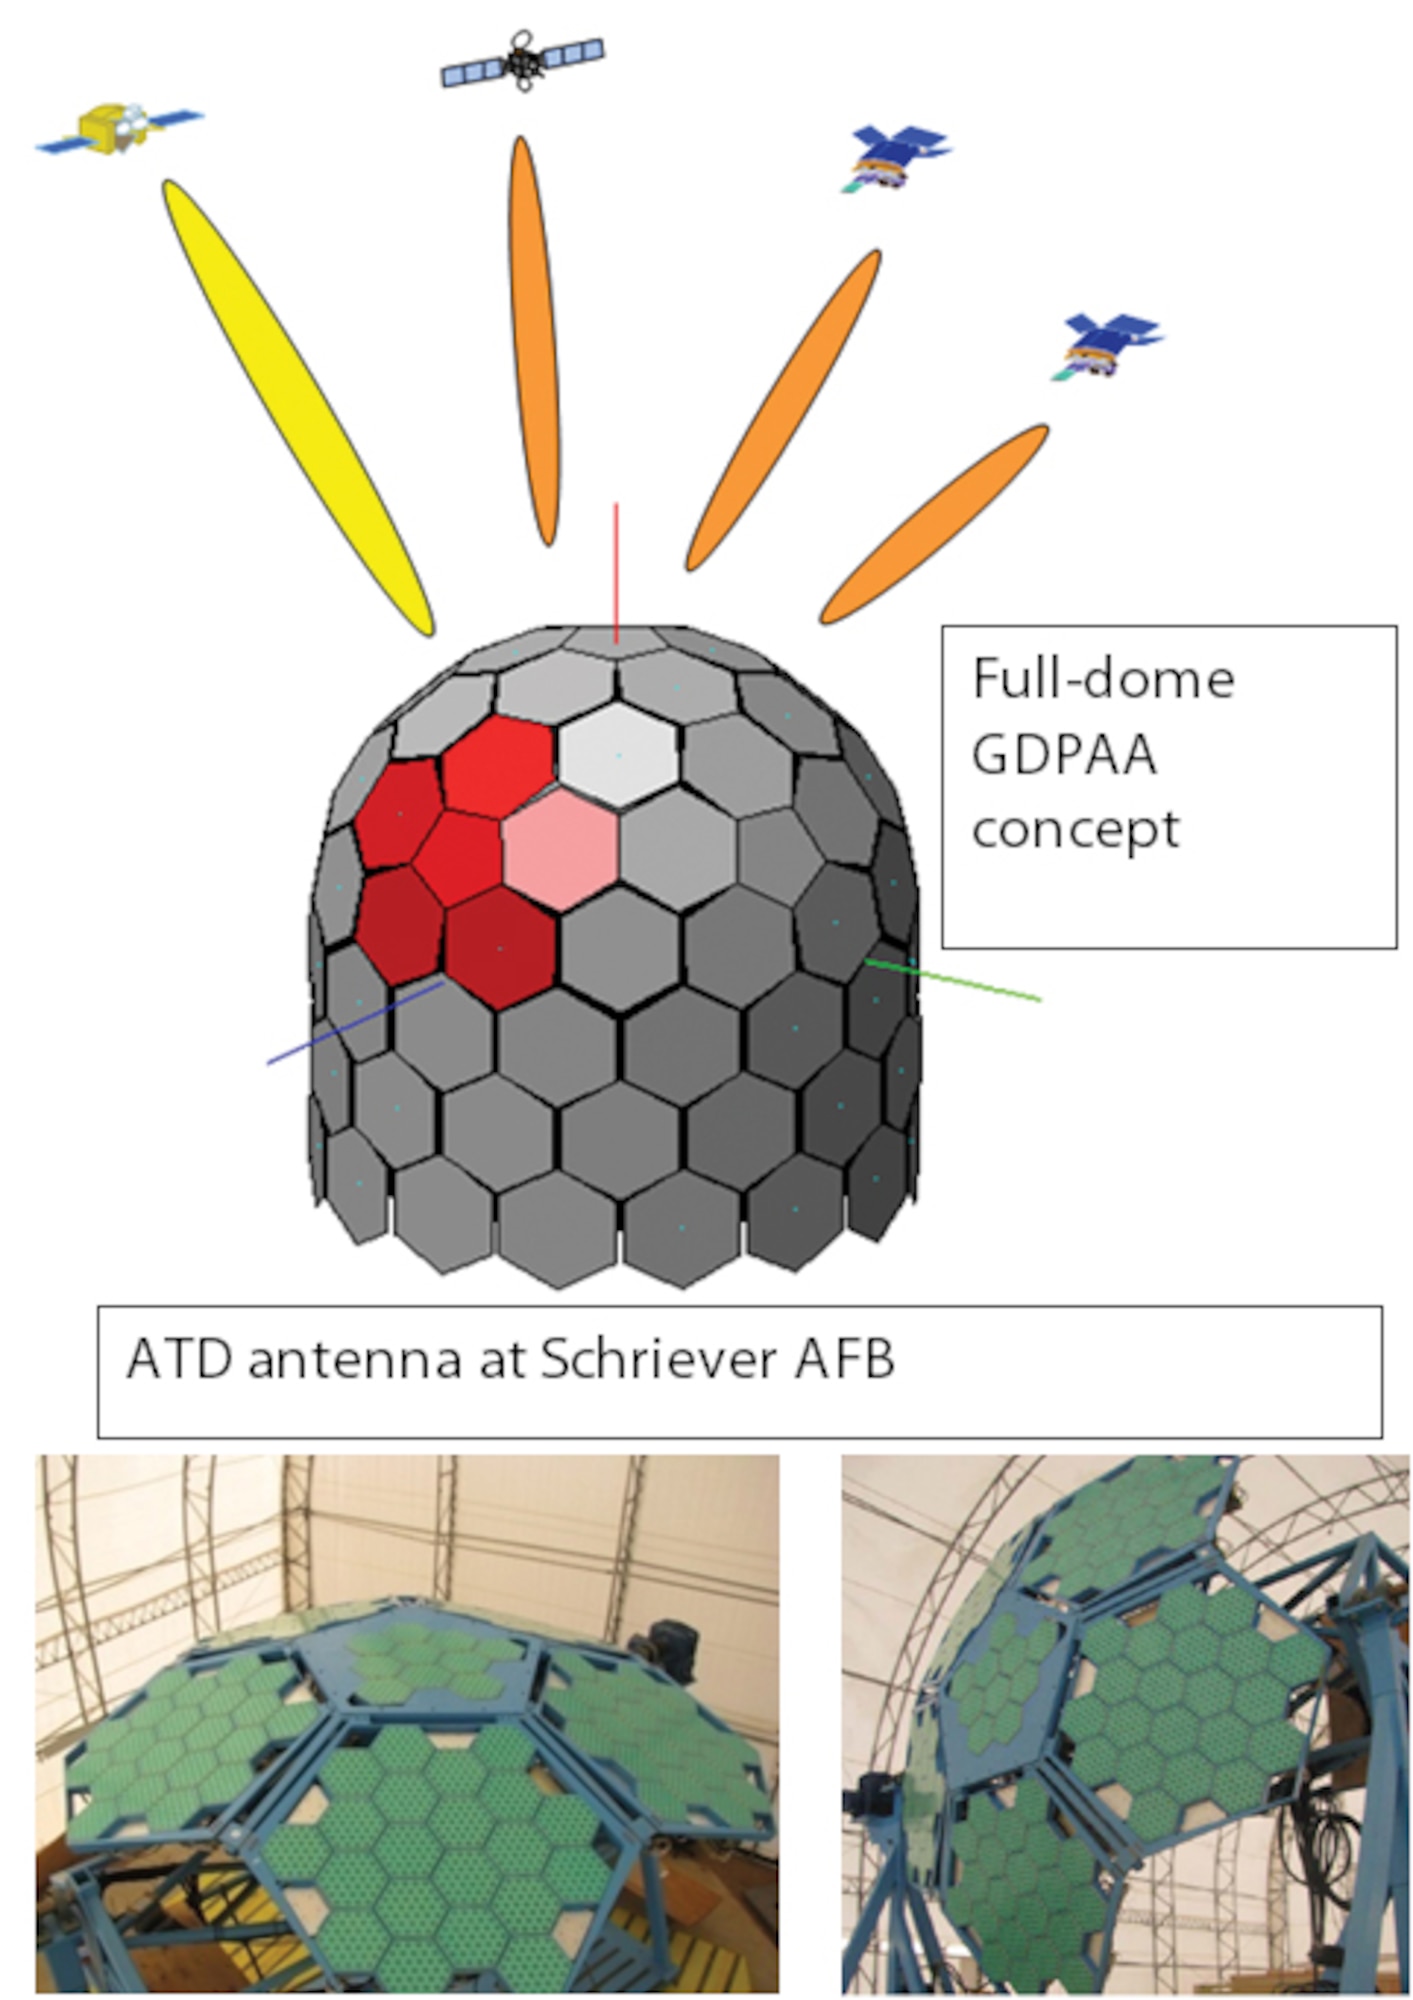 The Geodesic Dome Phased-Array Antenna Advanced Technology Demonstration proved the antenna's capacity to provide multiple, simultaneous, dual-band (L-band and S-band) contacts for telemetry, tracking, and command of Air Force Satellite Control Network satellites.  